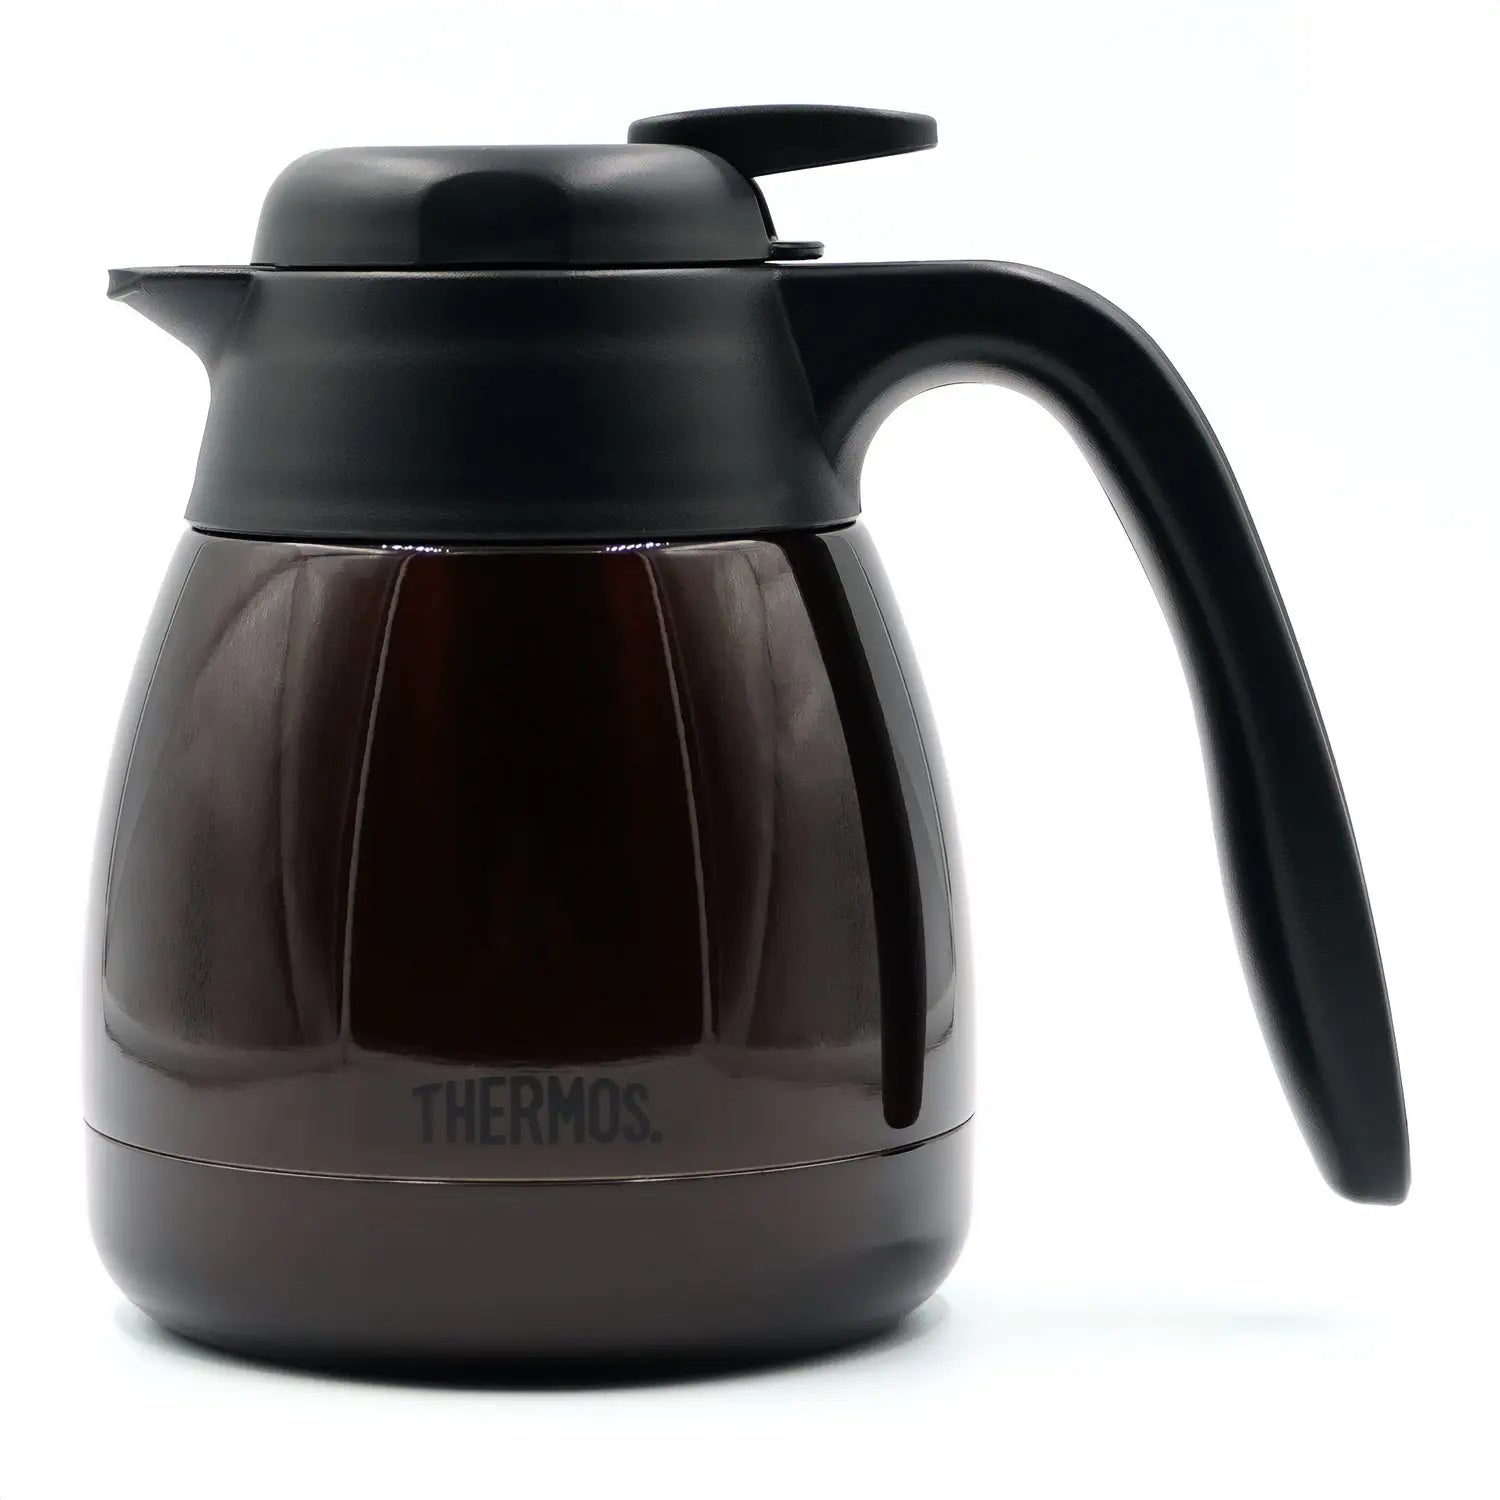 Thermos 20 oz. Espresso Vacuum Insulated Stainless Steel Carafe Thermos